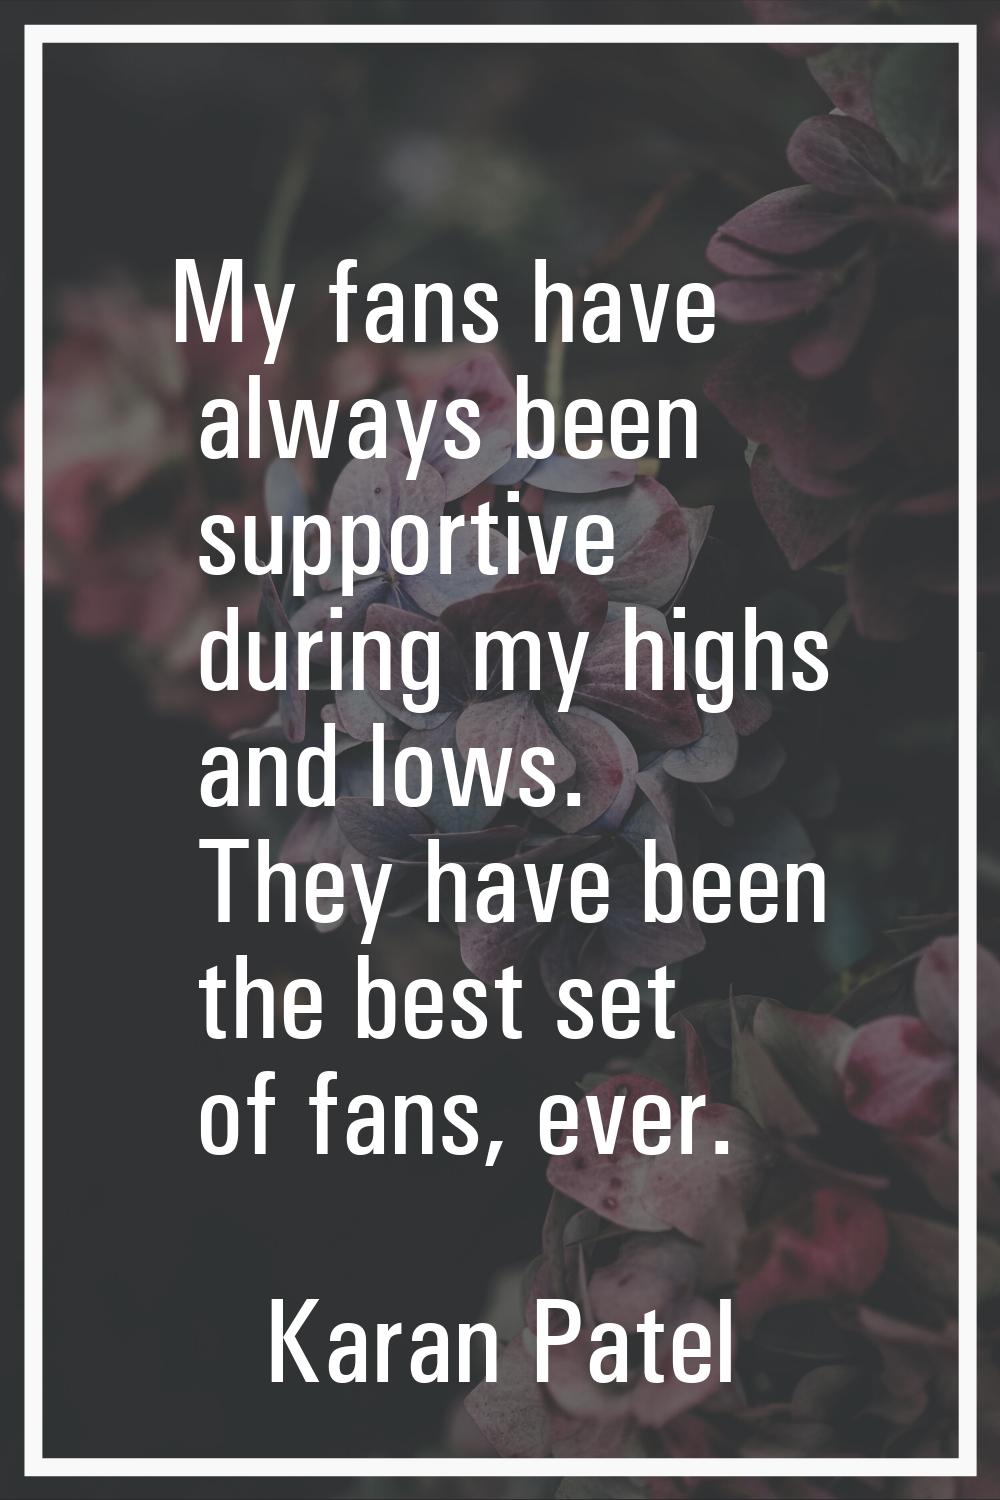 My fans have always been supportive during my highs and lows. They have been the best set of fans, 